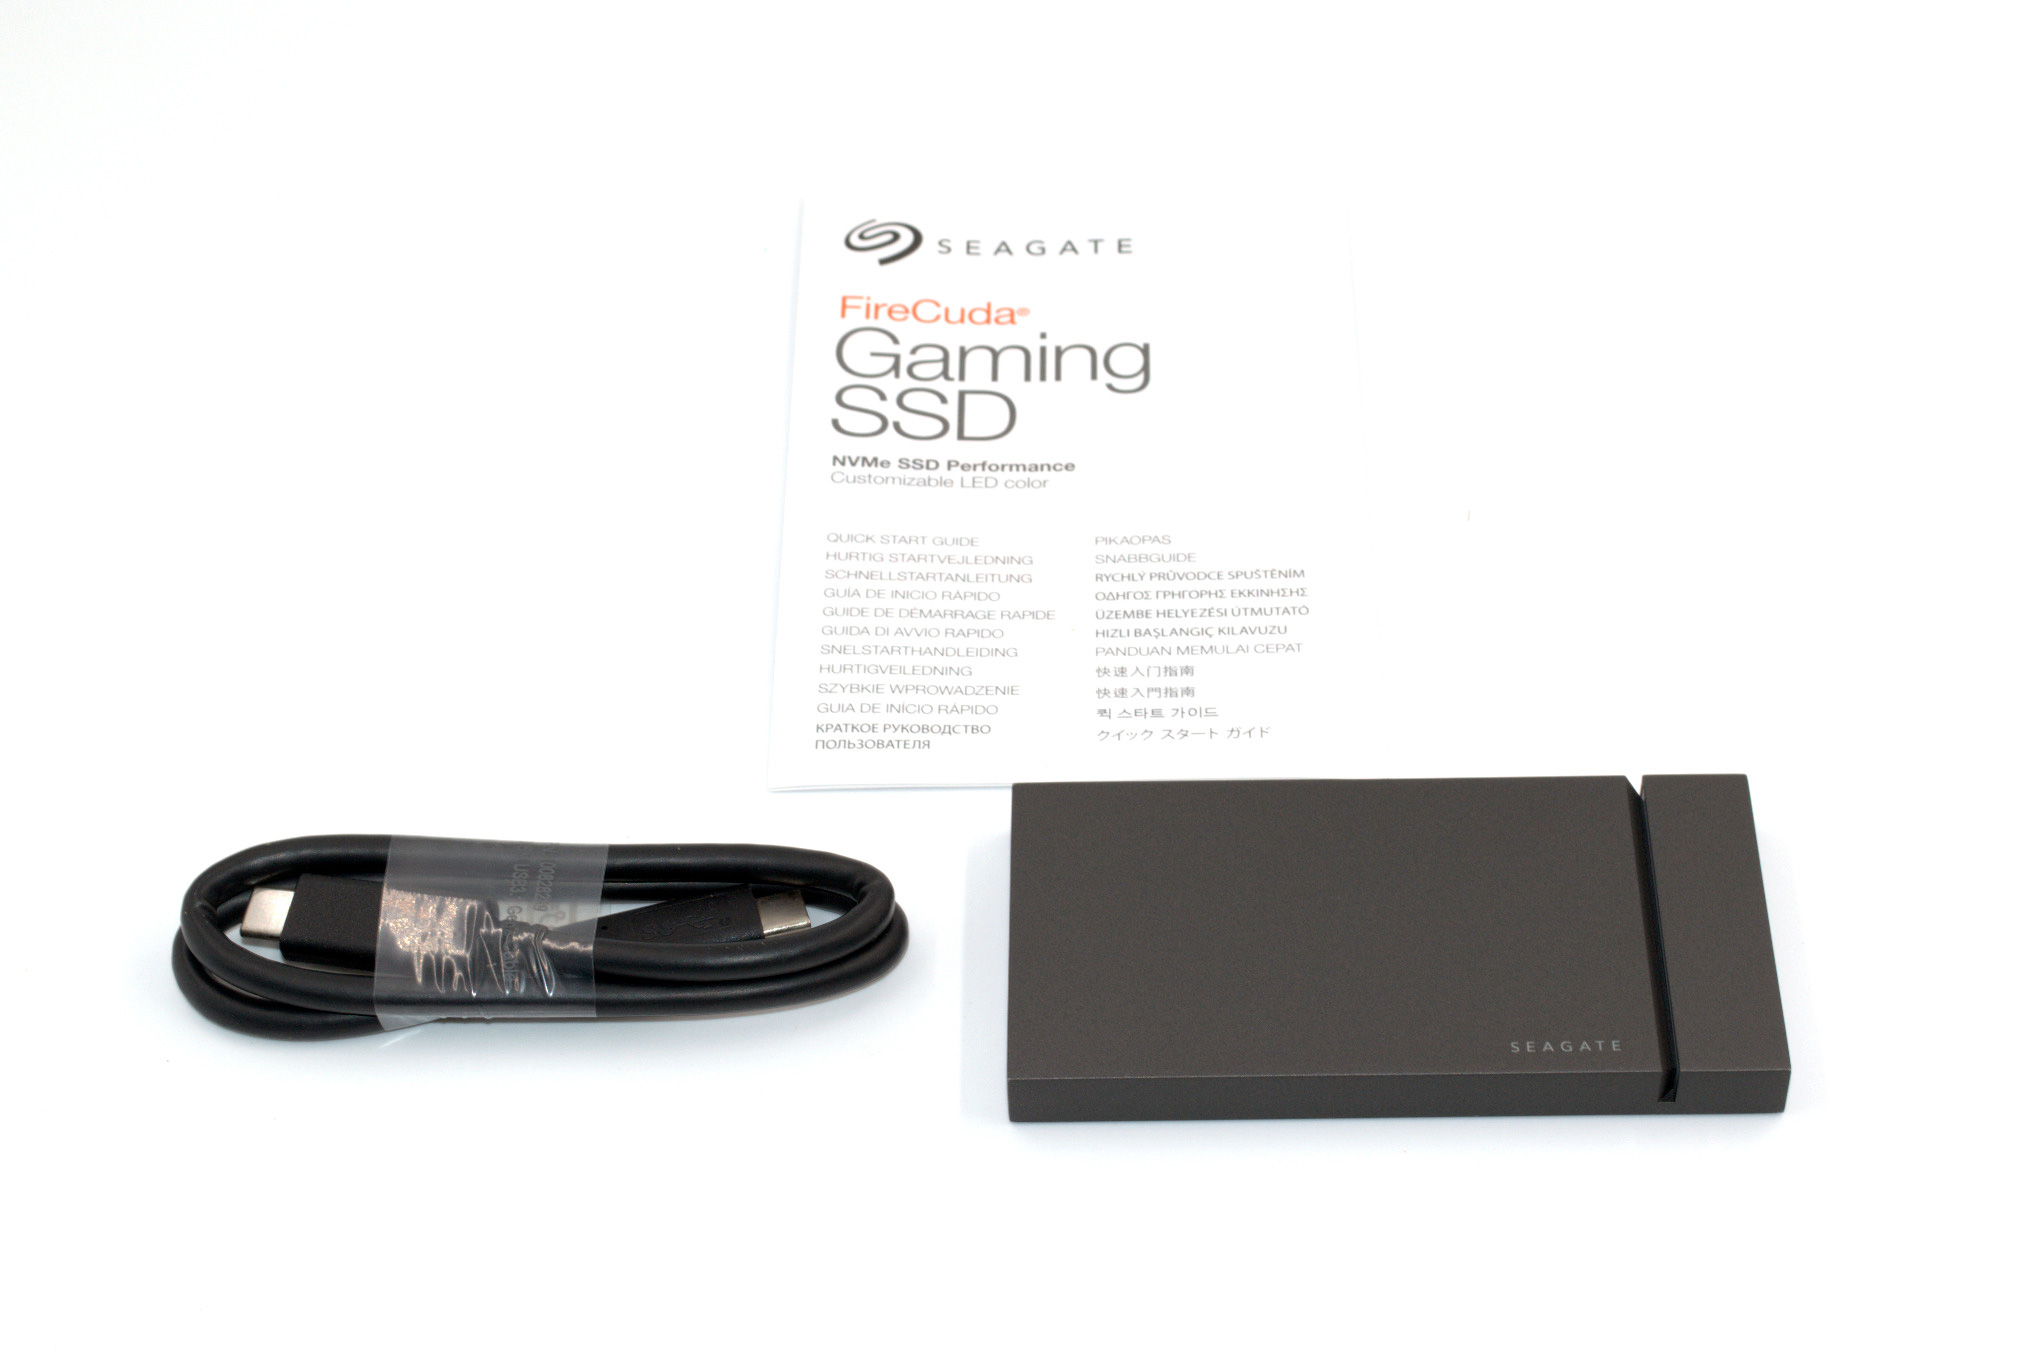 Seagate FireCuda Gaming SSD Review: RGB-Infused USB 3.2 Gen 2x2